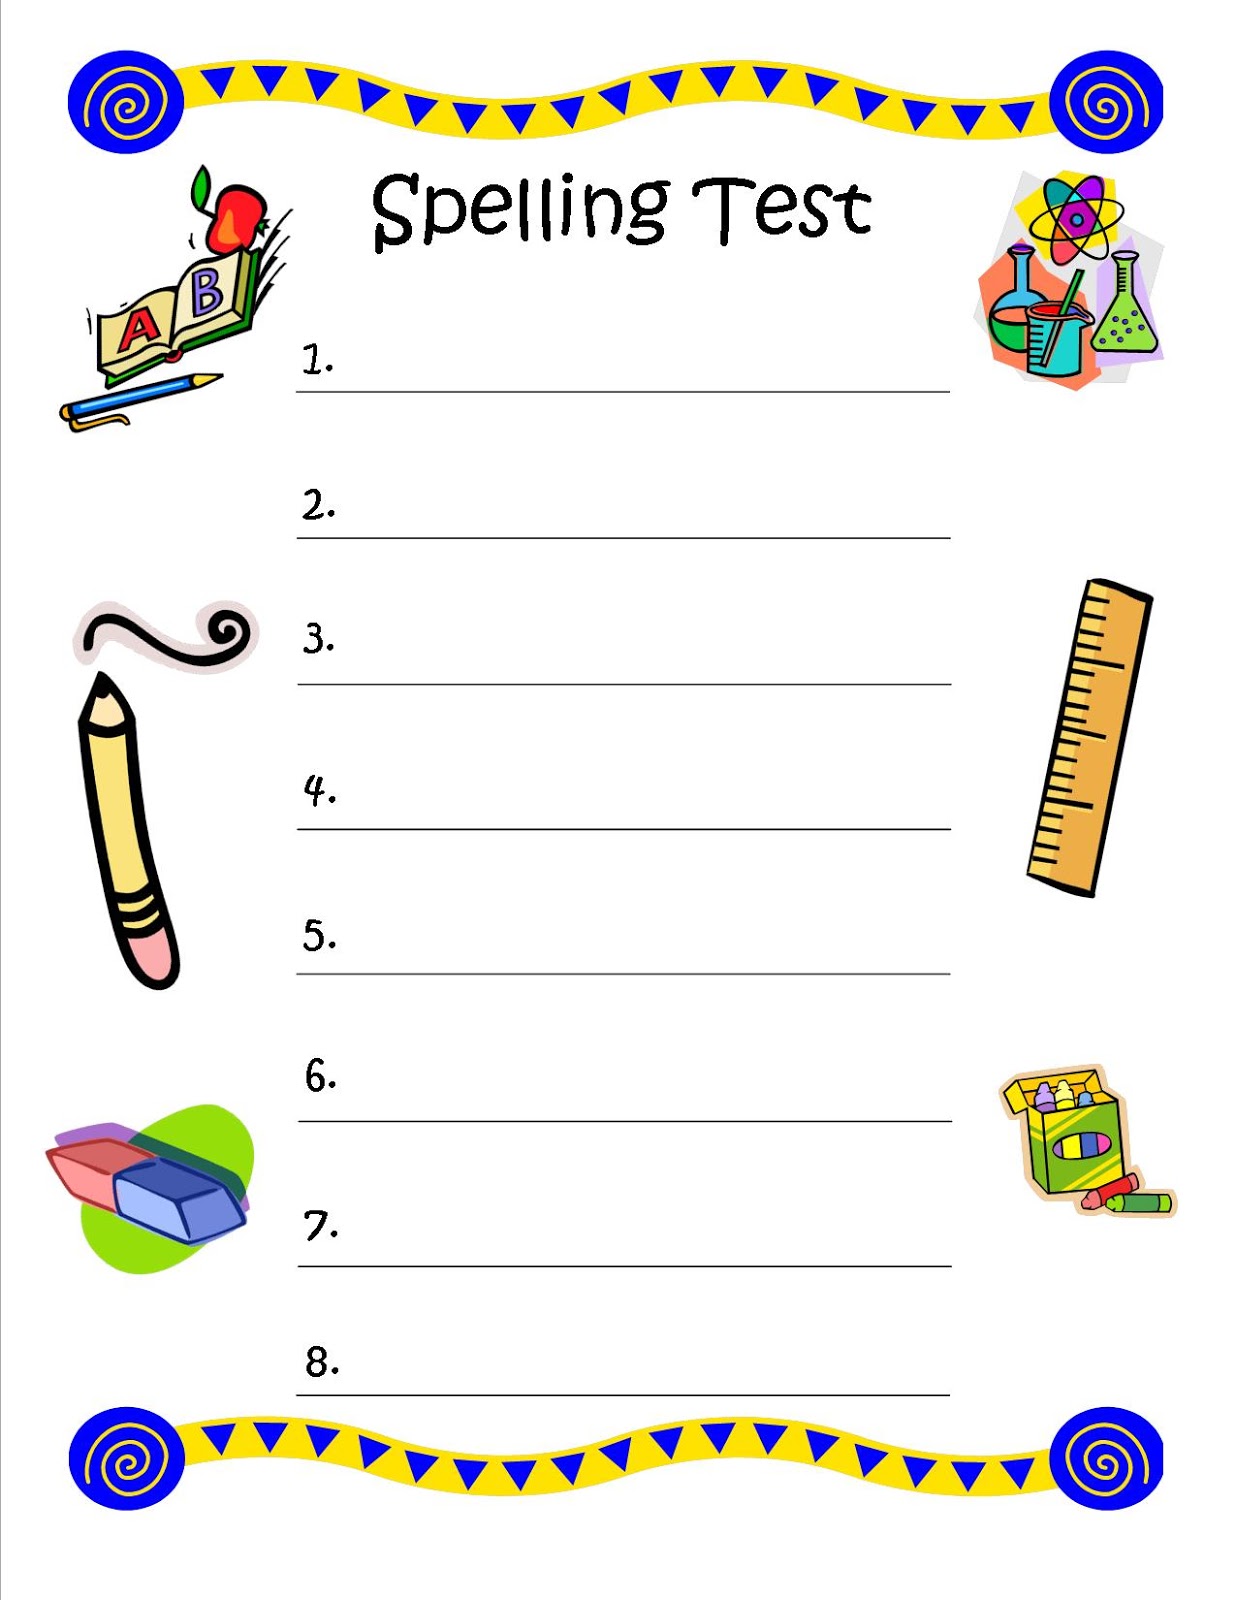 Spelling Test Template | Search Results | Calendar 2015